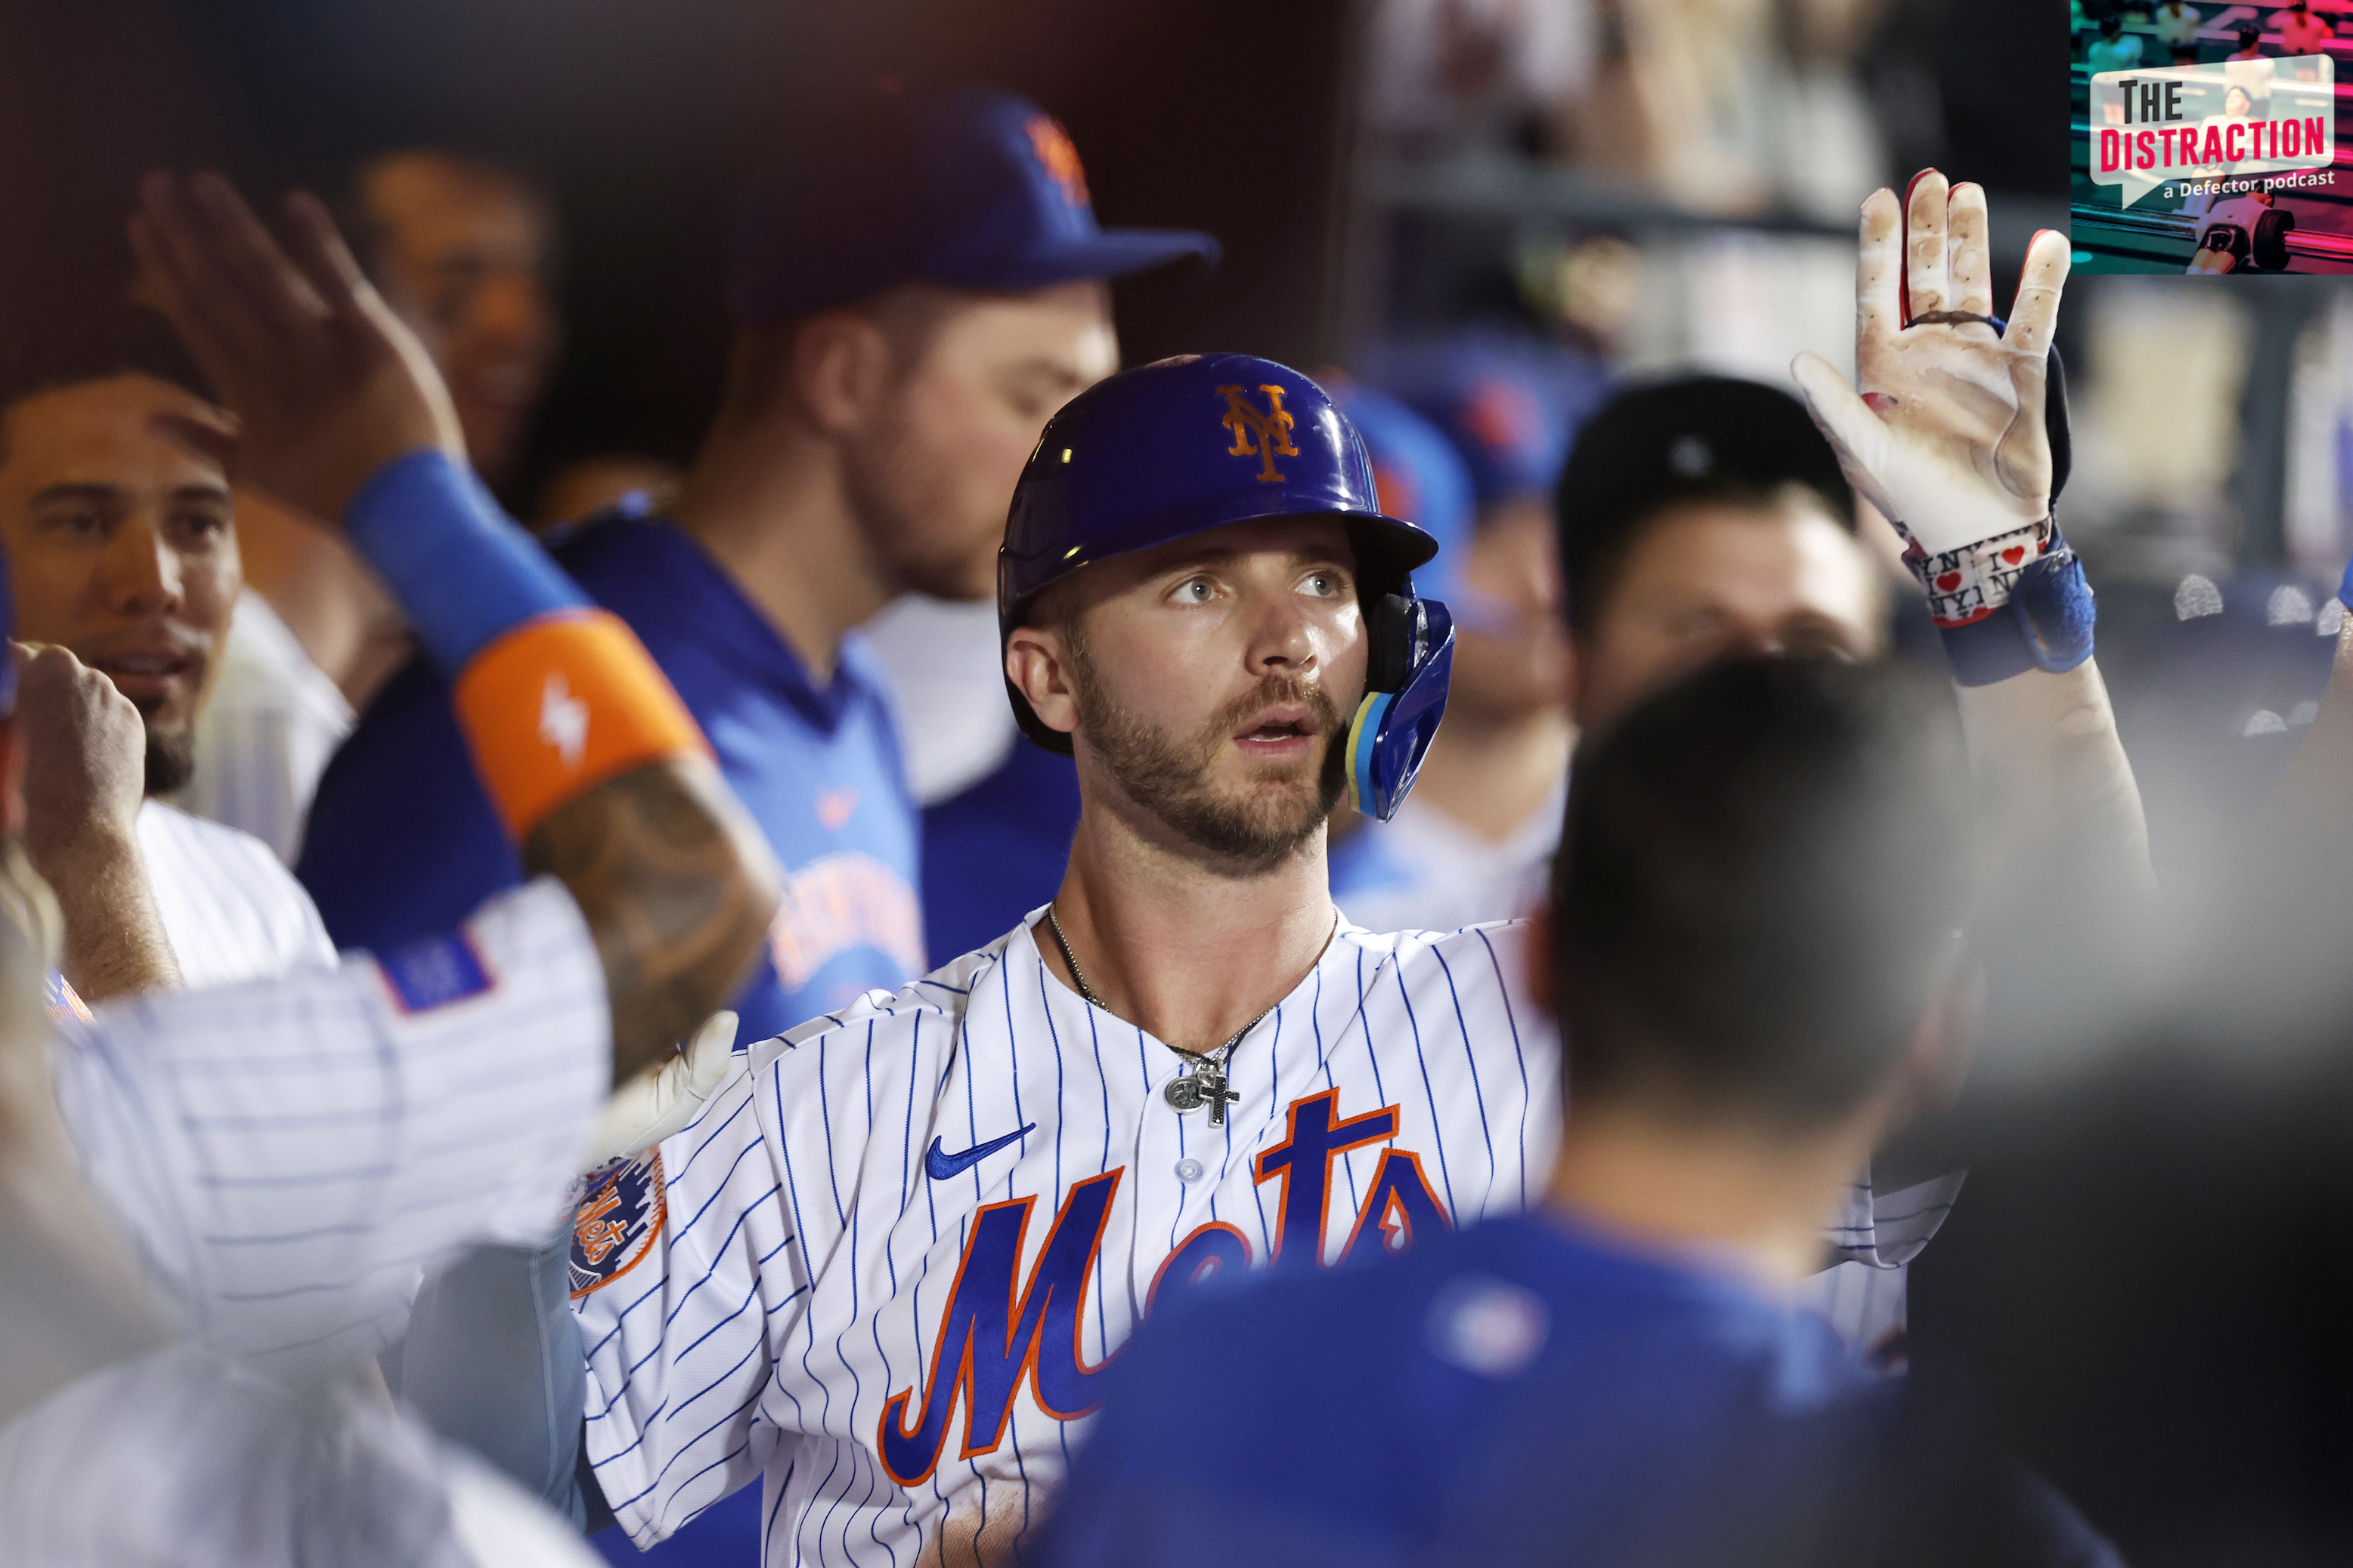 Nothing's better than being a champion' - Mets' Pete Alonso speaks